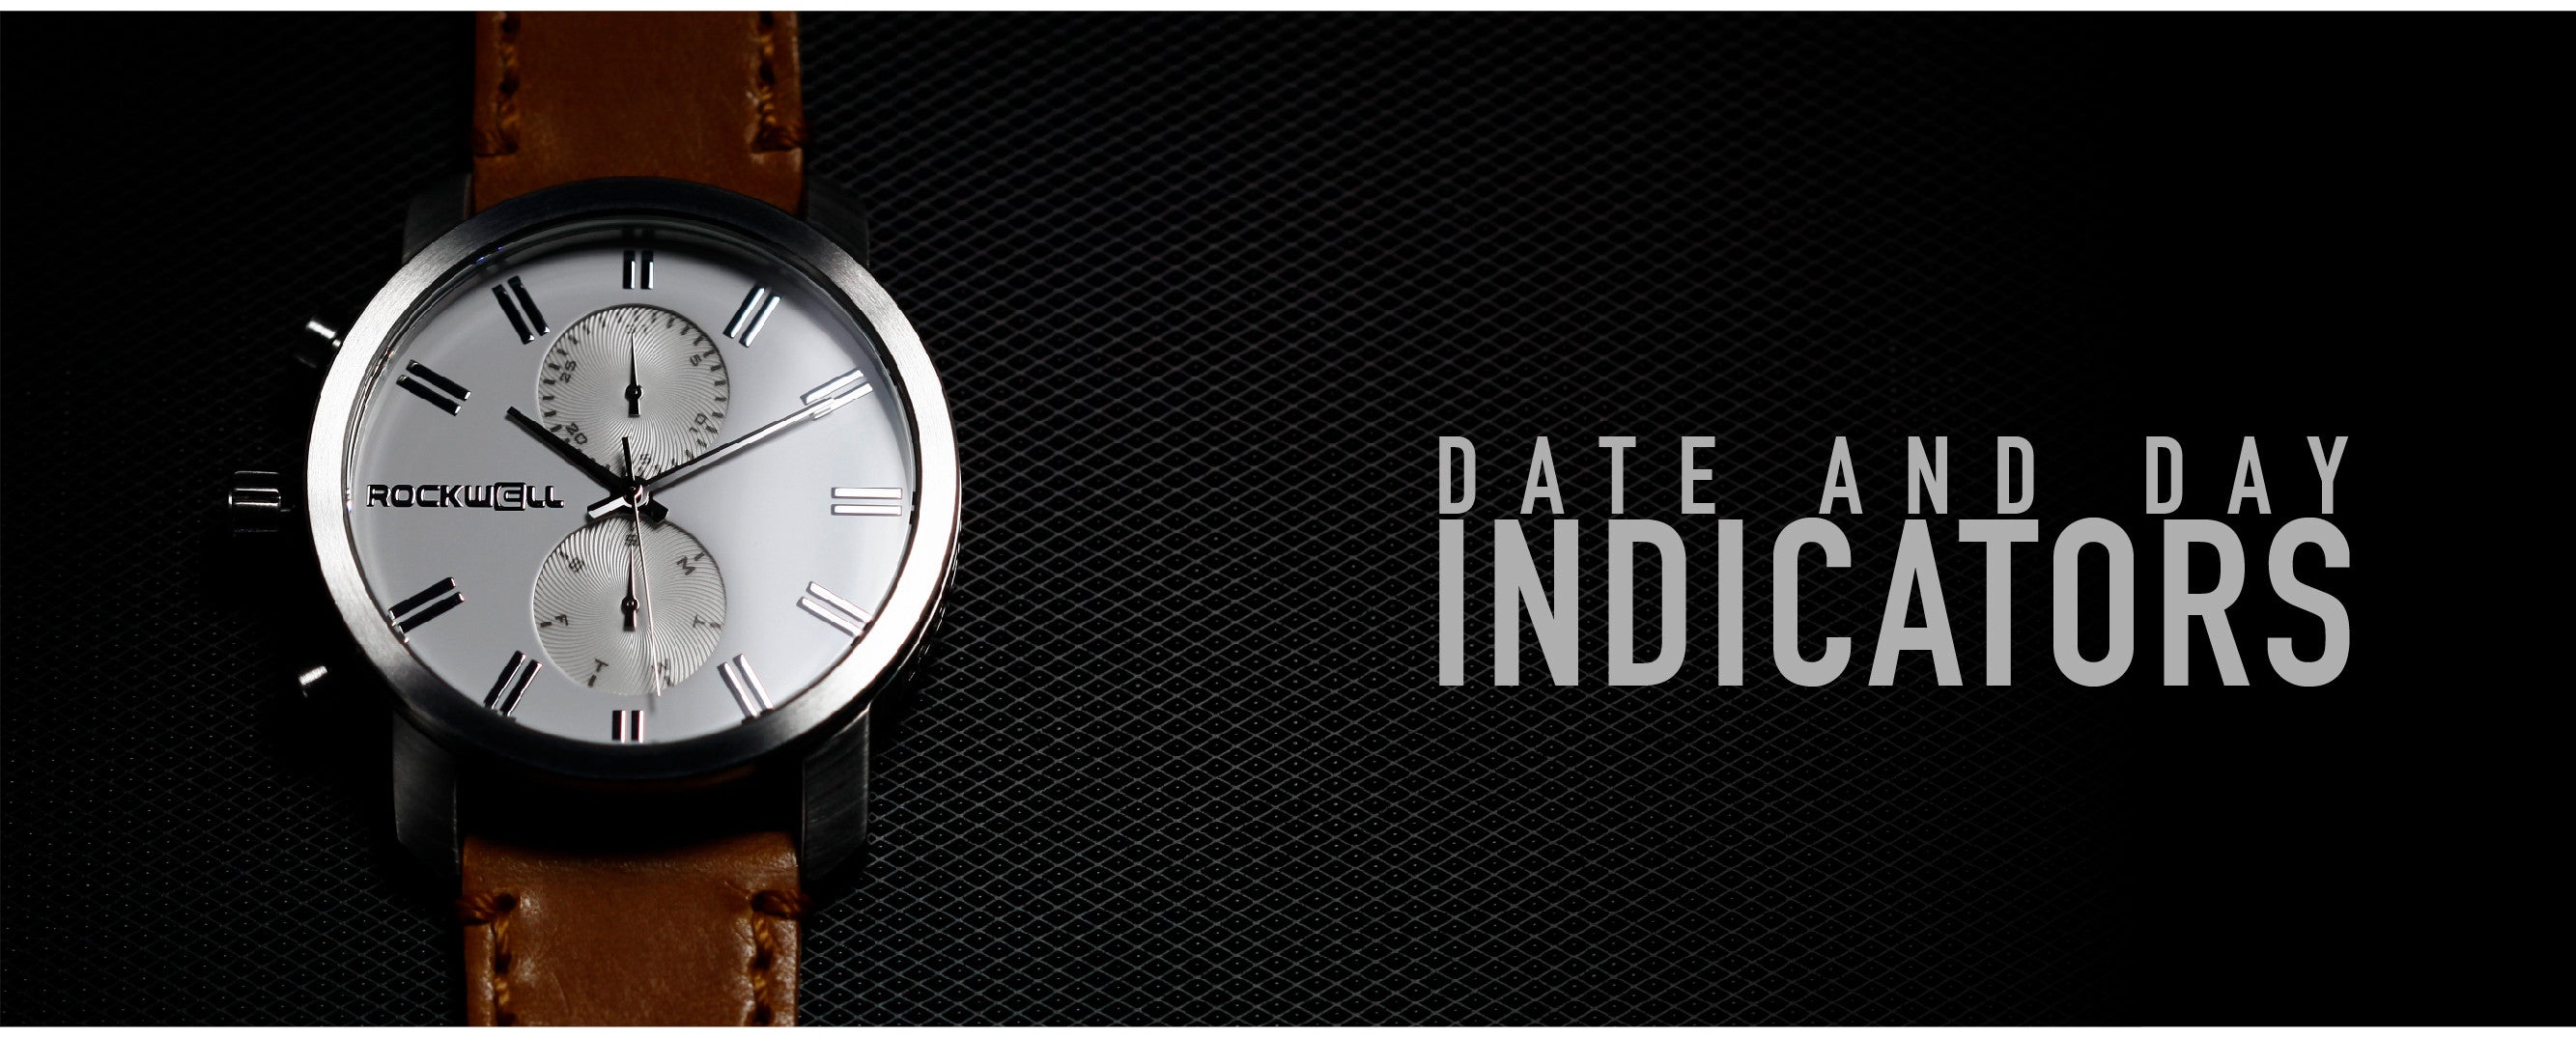 day and date indicators on the apollo watch